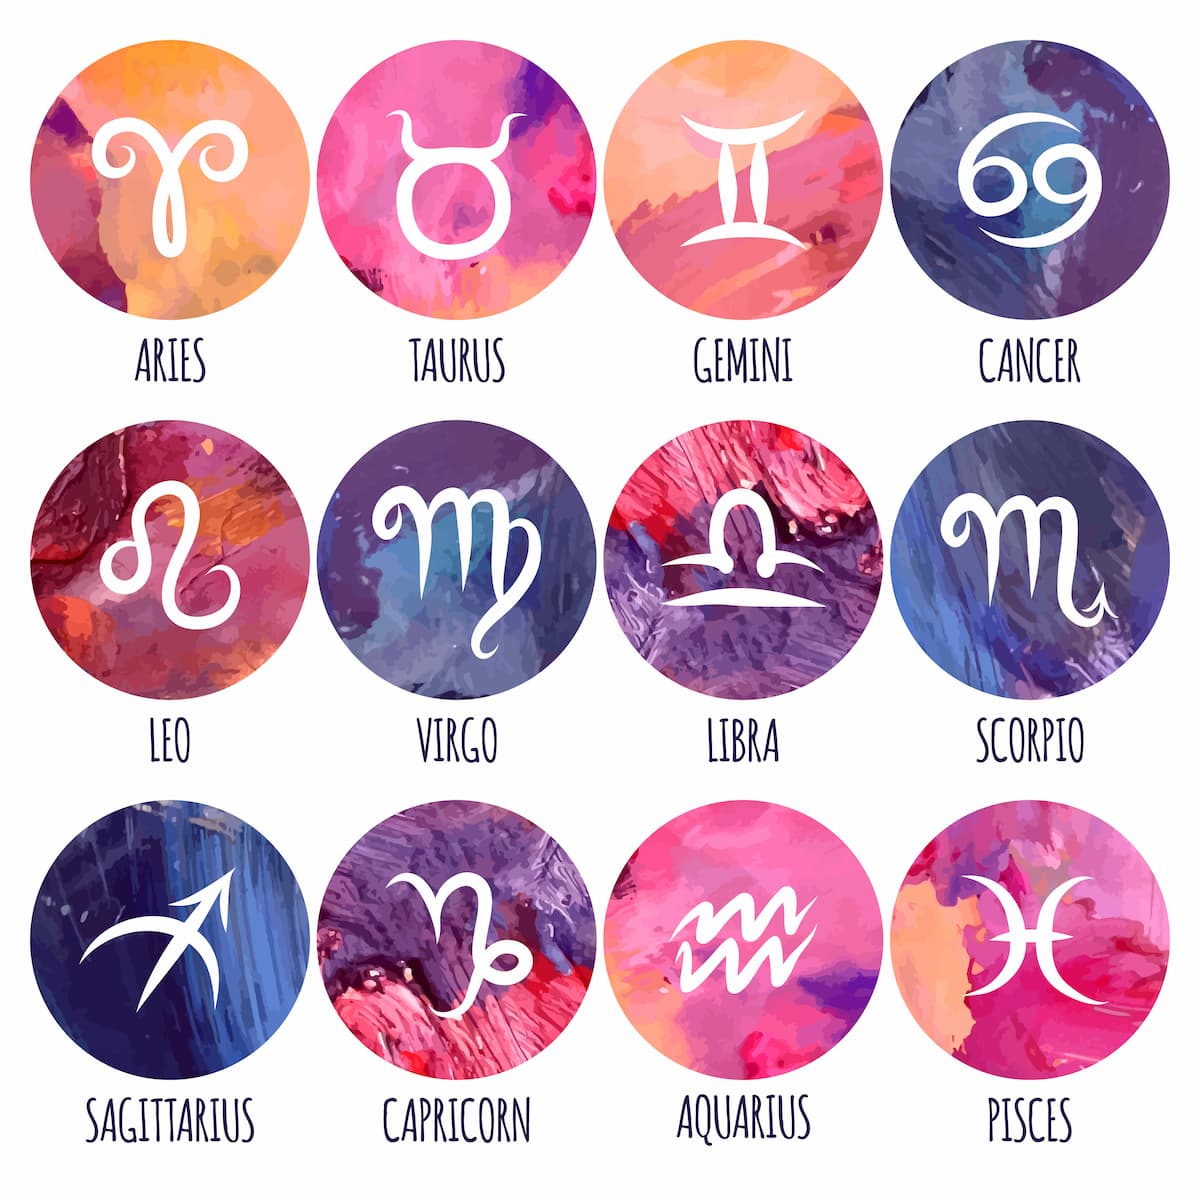 Find The Perfect Job Based On Your Zodiac Sign